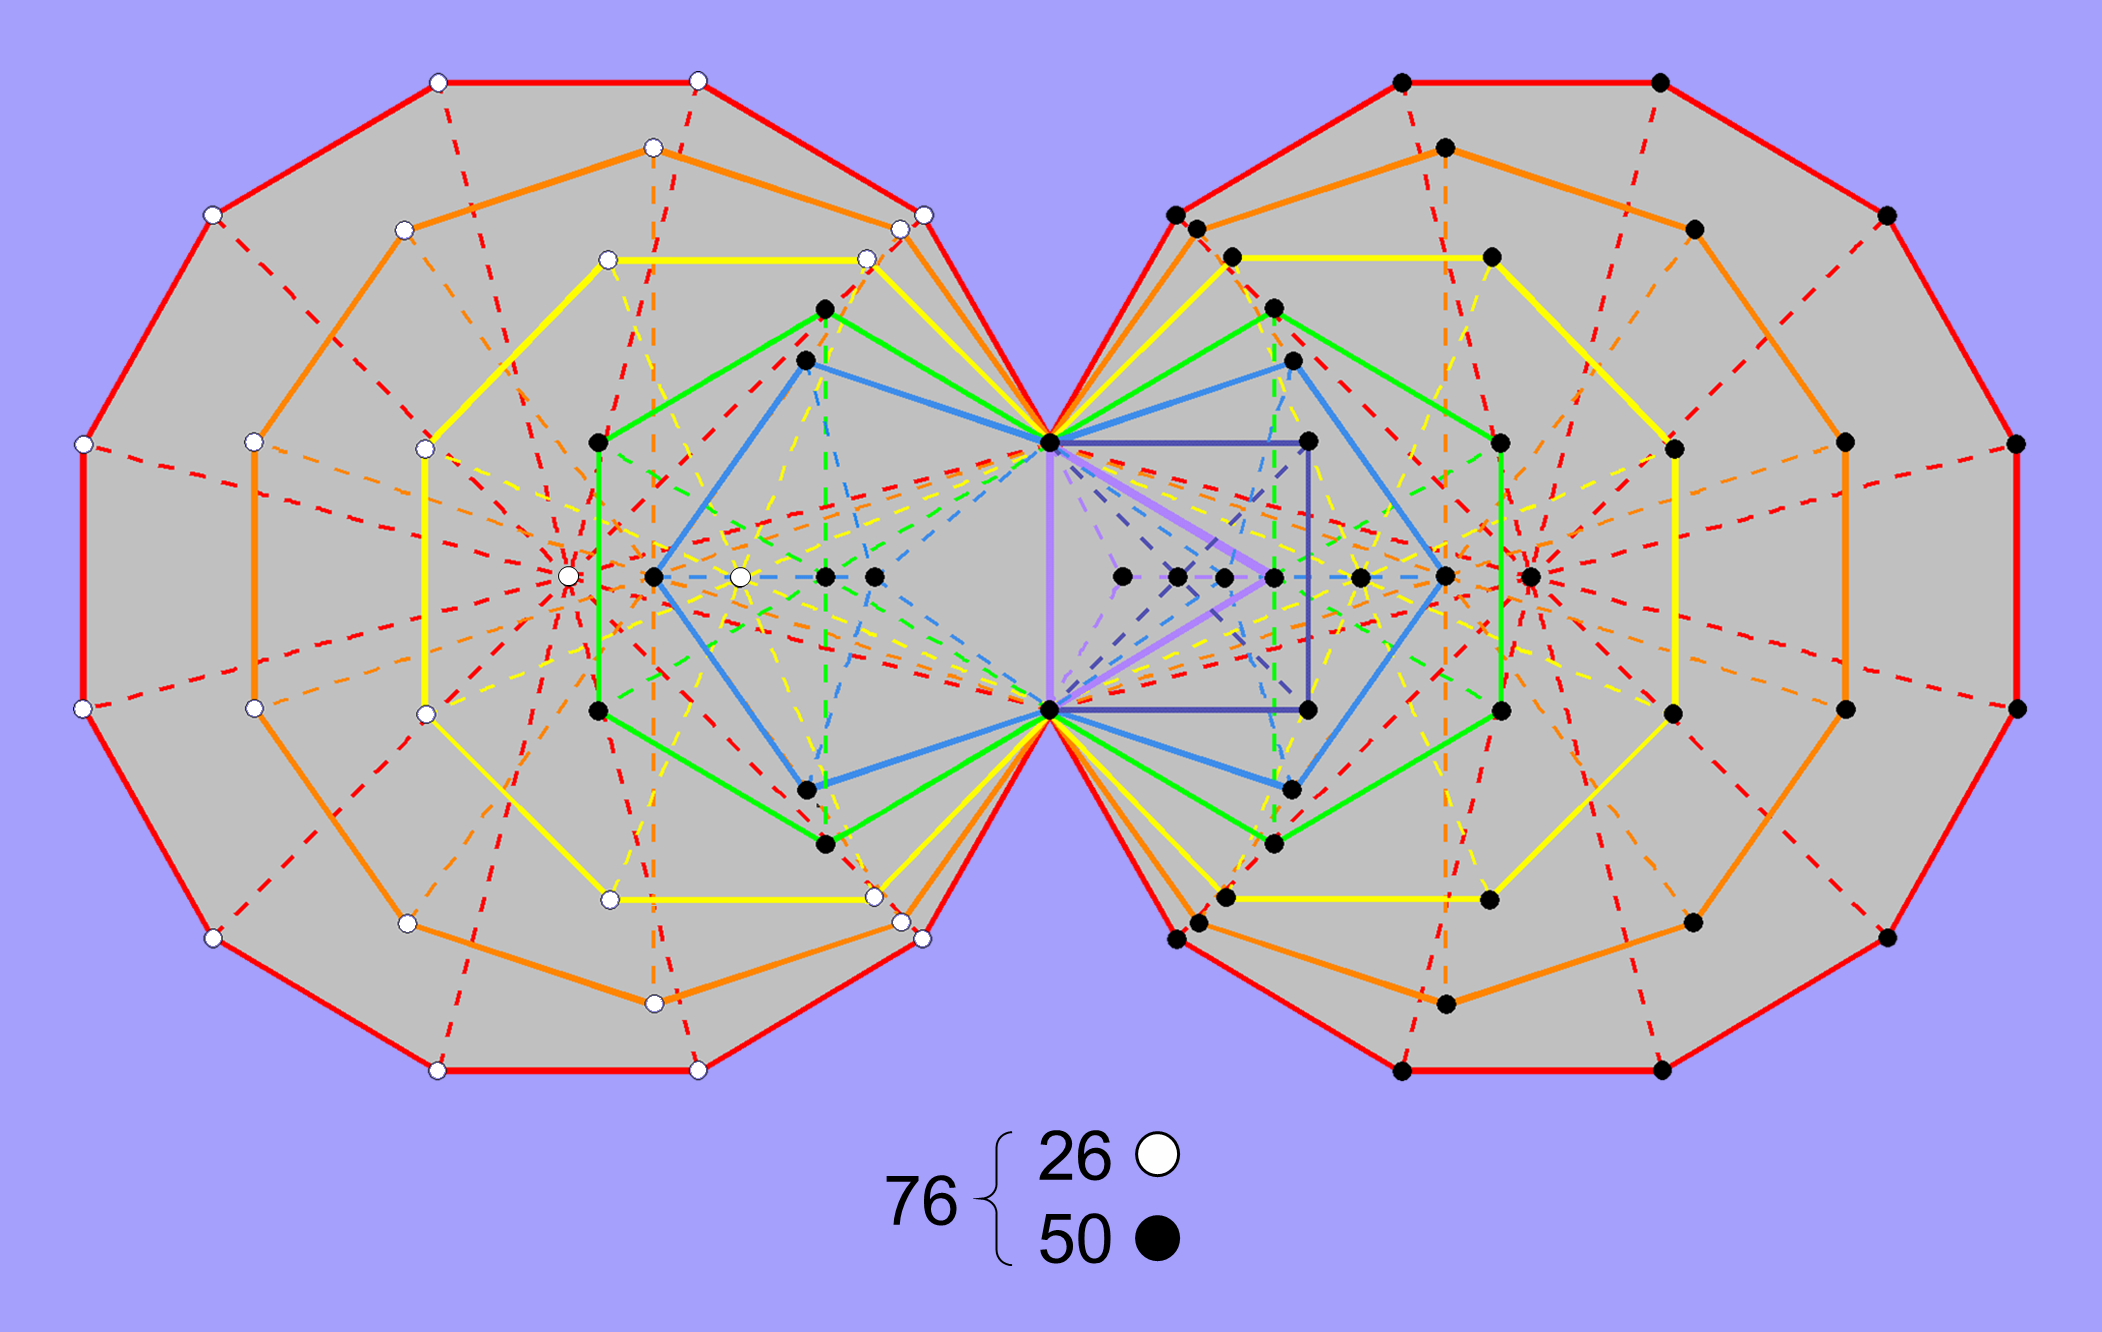 26 & 50 corners of sectors of (7+5) enfolded polygons